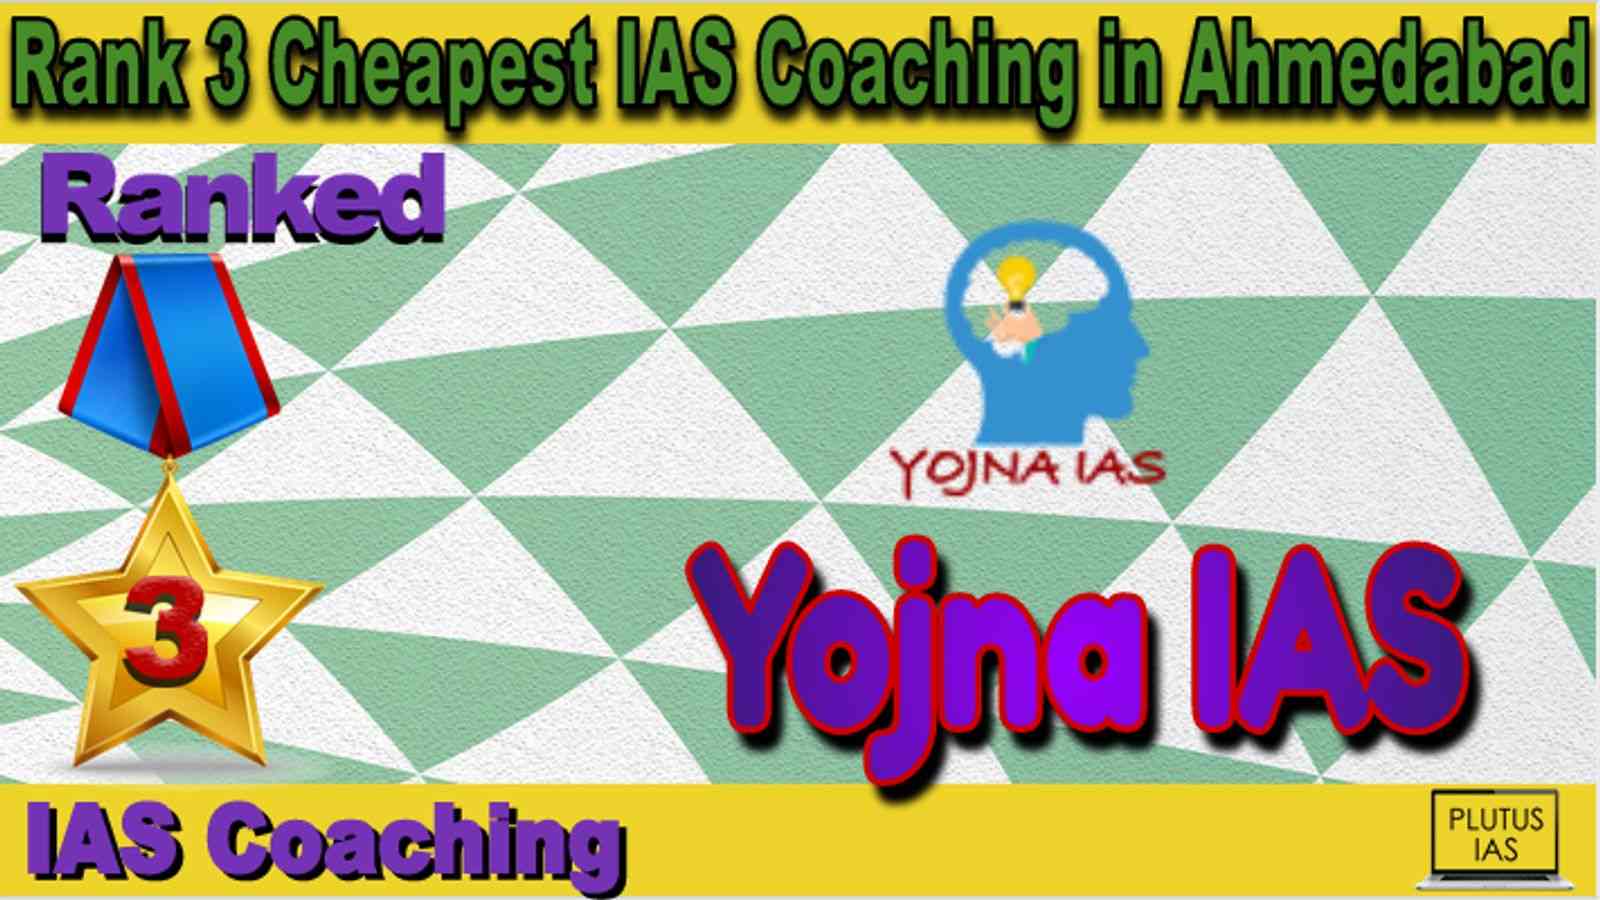 Rank 3 Cheapest IAS Coaching in Ahmedabad